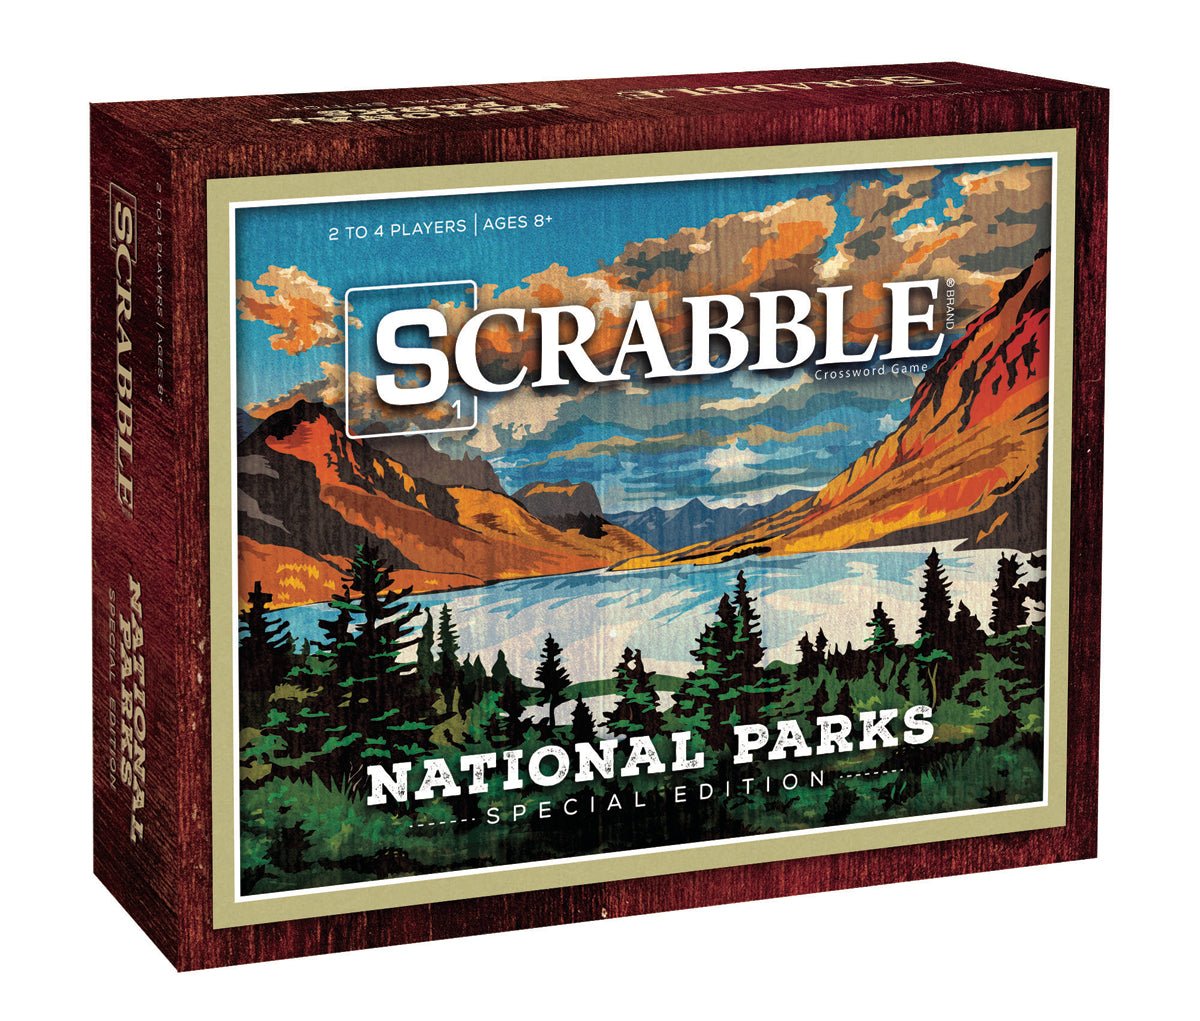 Scrabble: National Parks - The Fourth Place